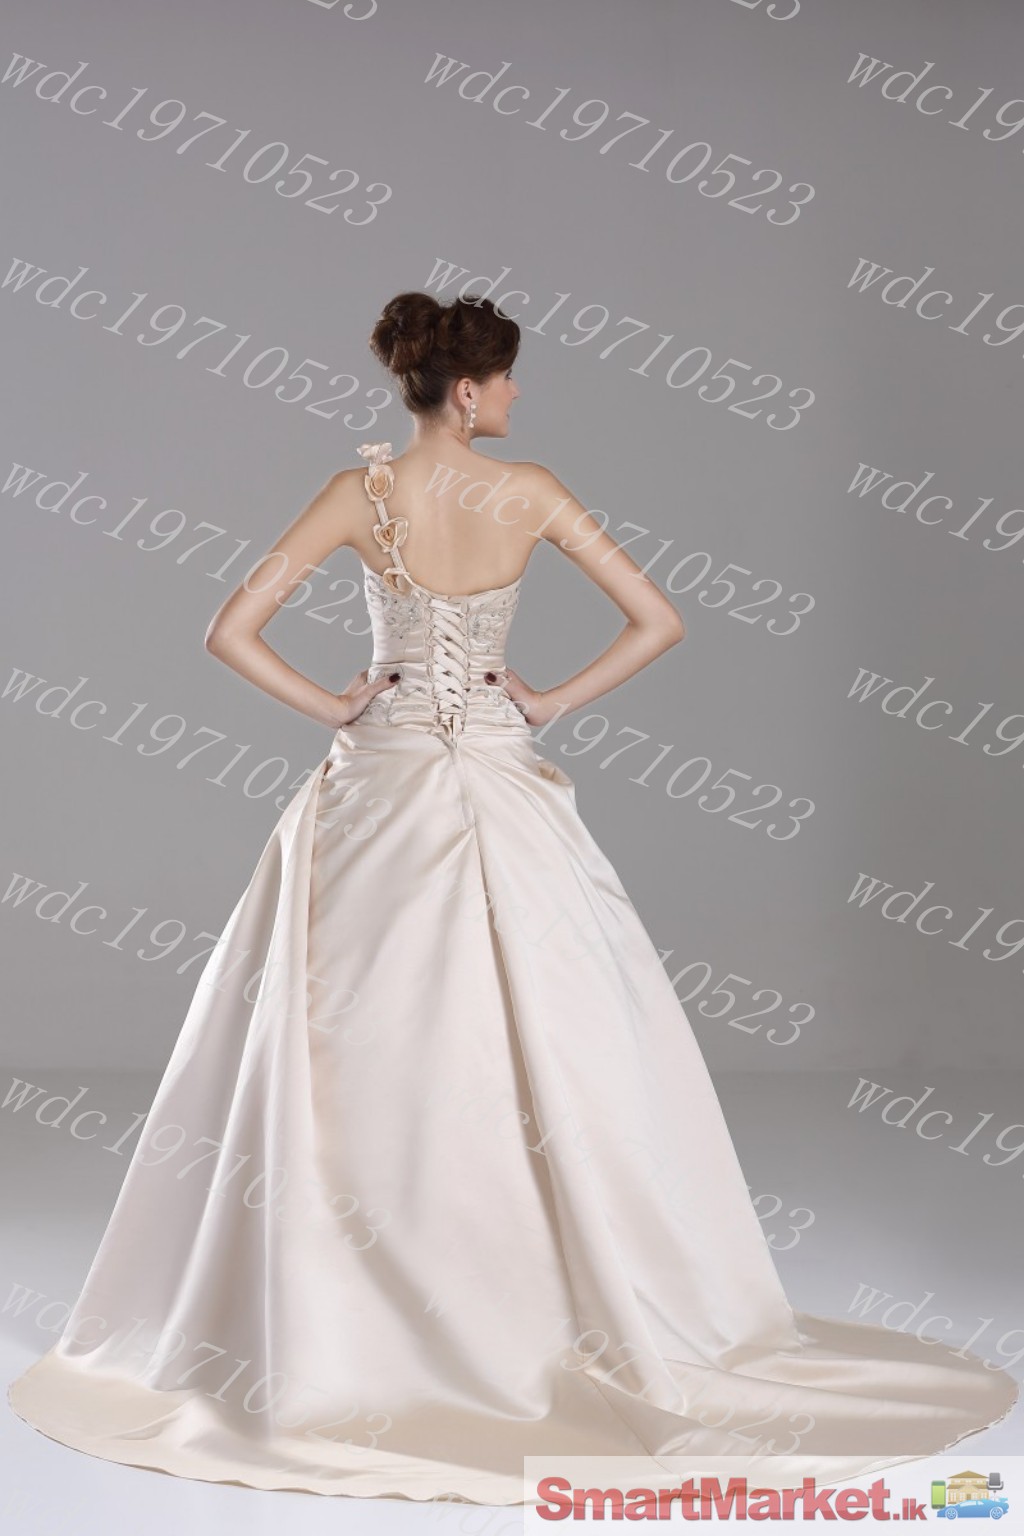 Bridal Gown - Cream Color Brand New Gorgeous gown for quick sale